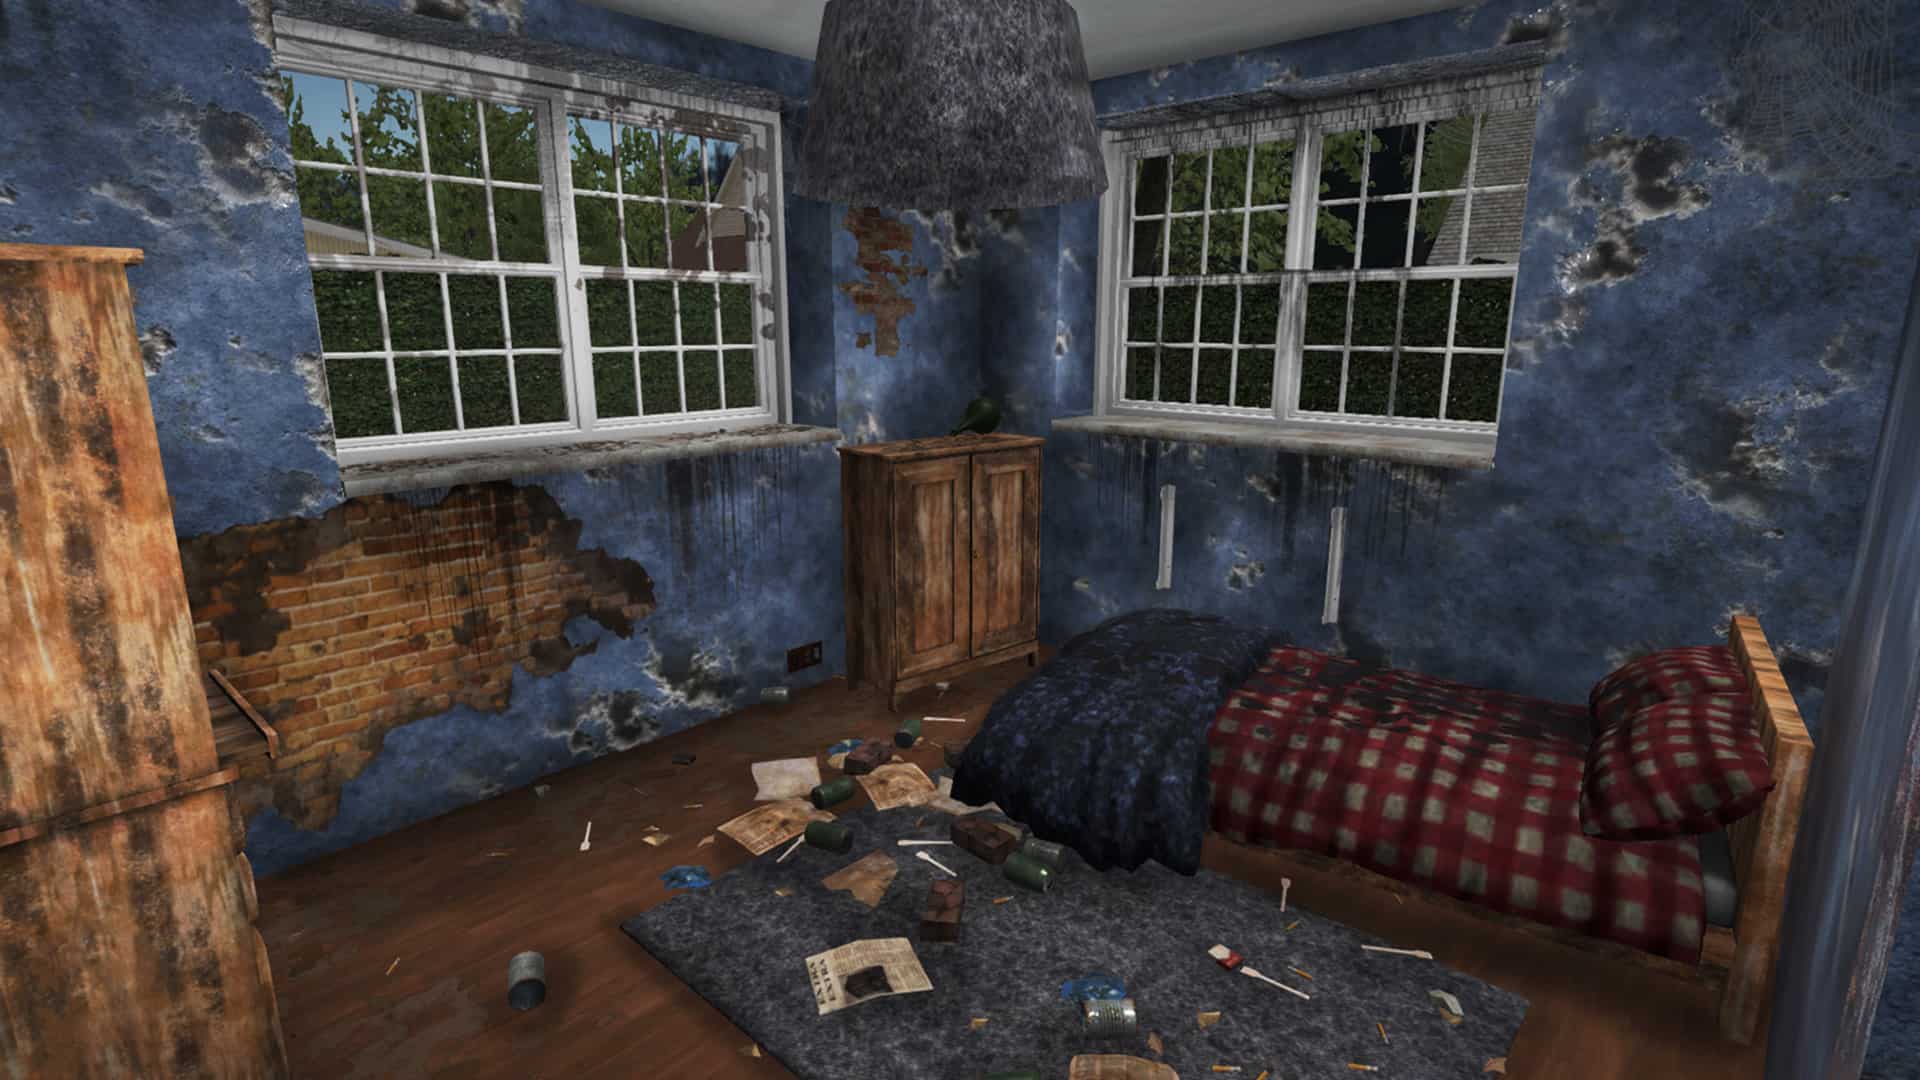 download house flipper pc